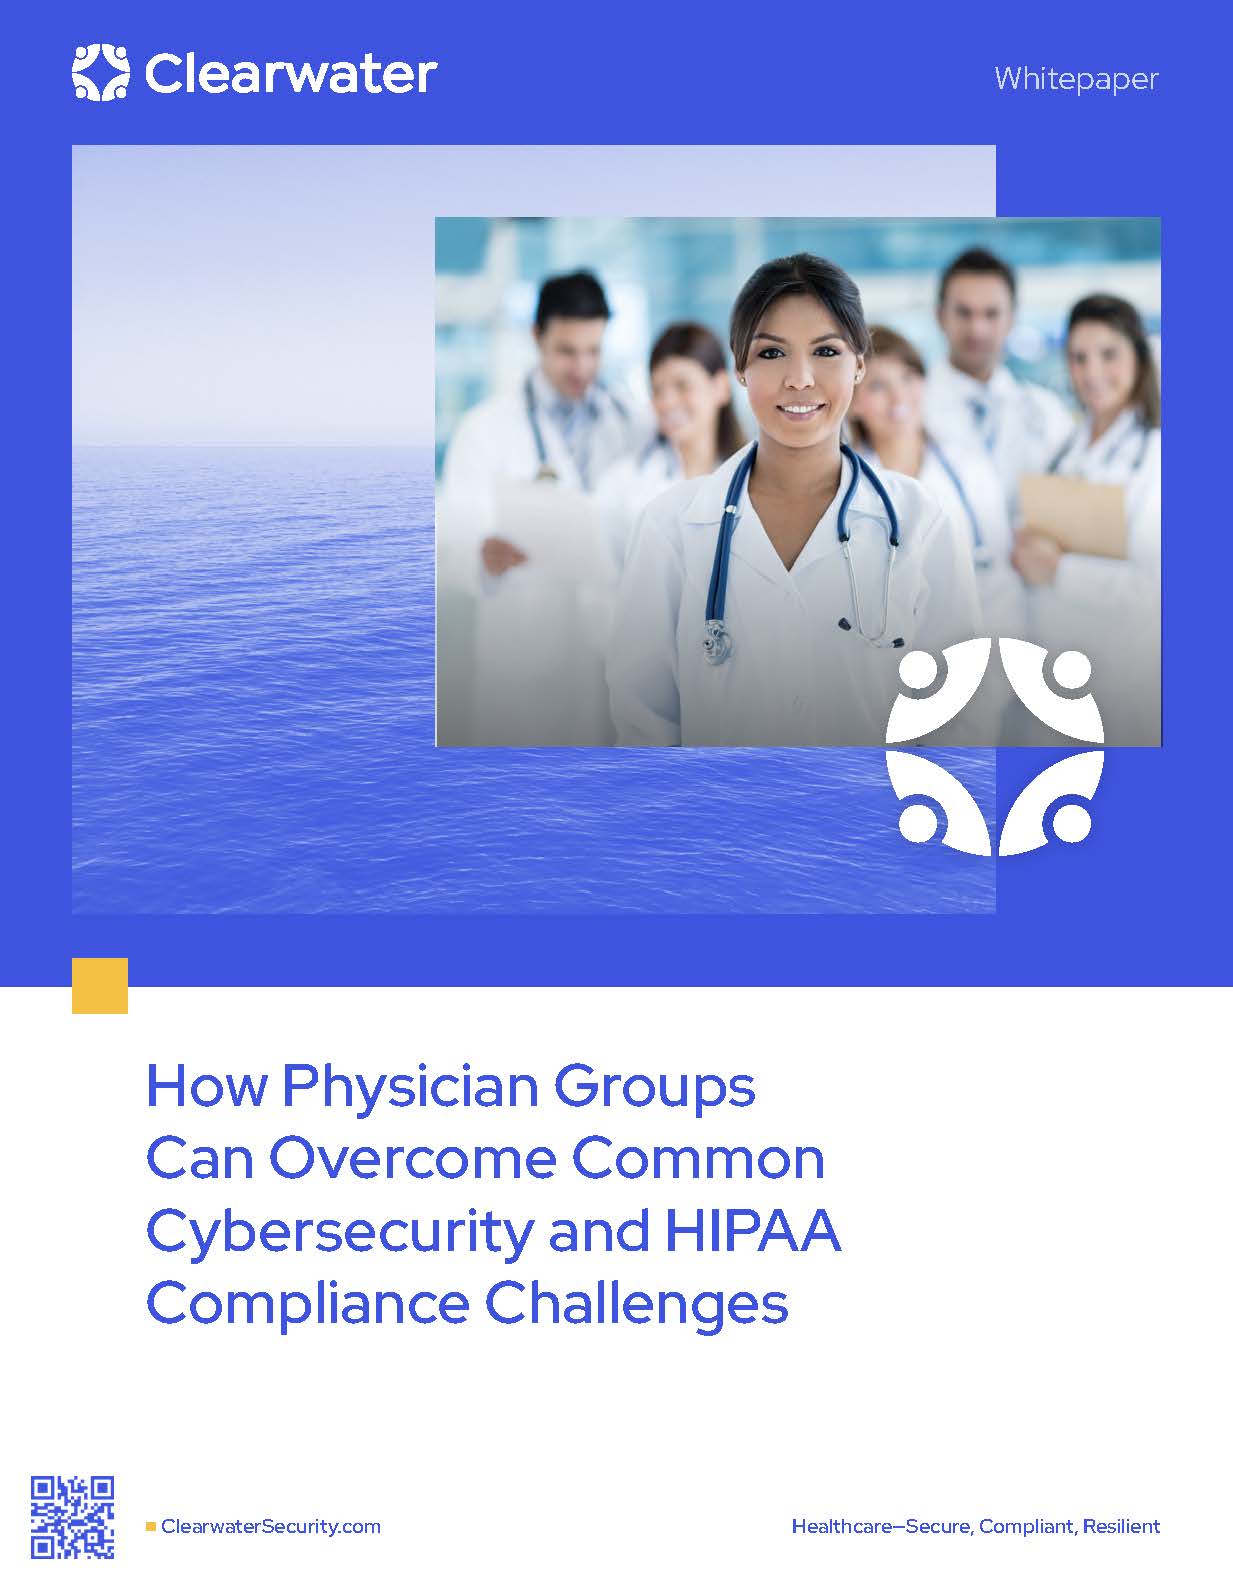 How Physician Groups Can Overcome Common Cybersecurity and HIPAA Compliance Challenges by Clearwater